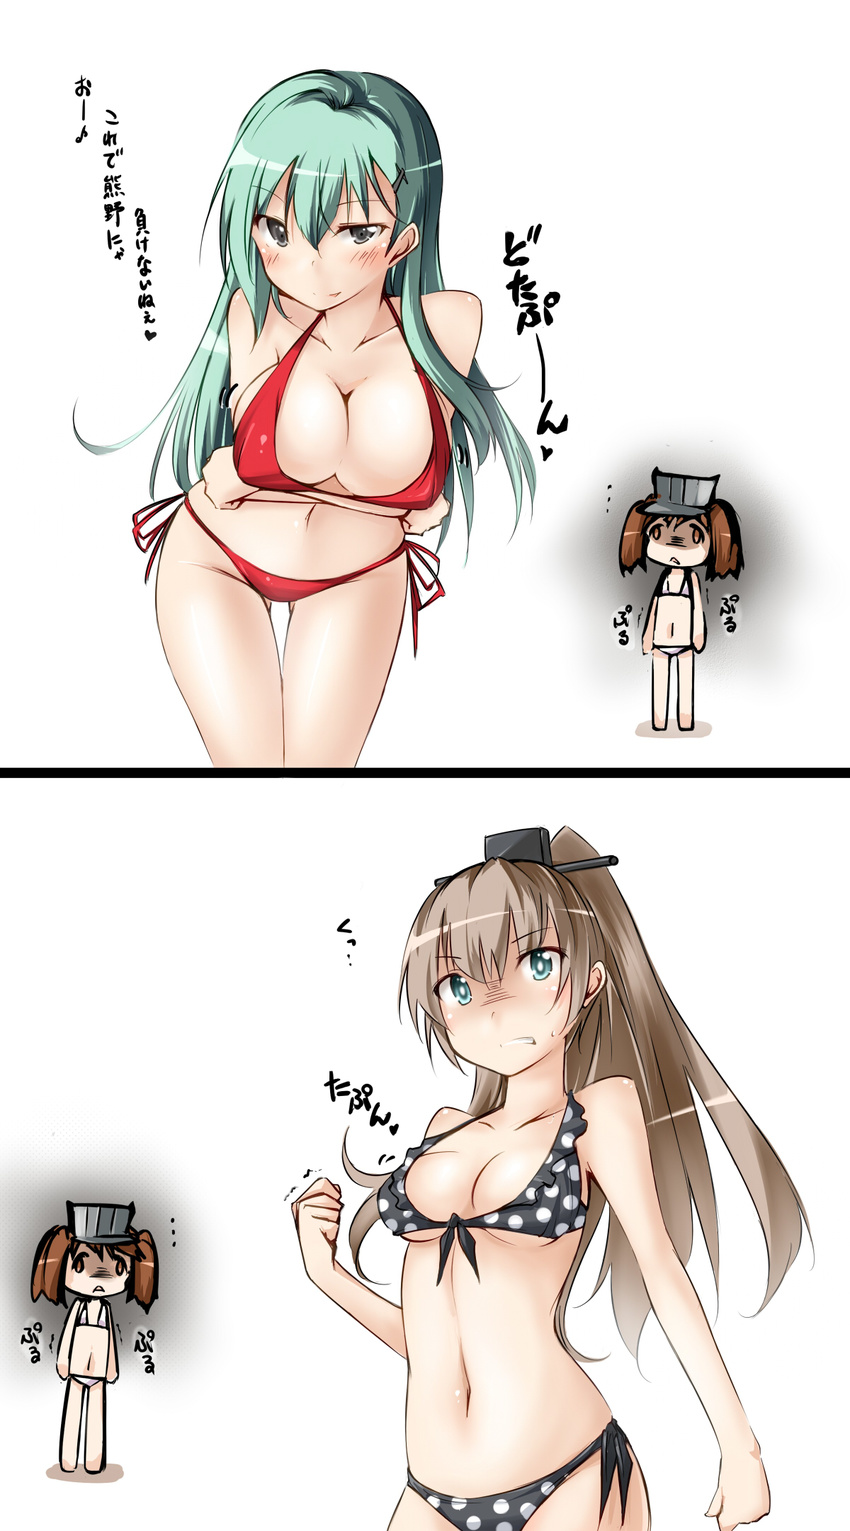 3girls aqua_eyes aqua_hair bikini breast_envy breasts brown_eyes brown_hair cleavage face_of_the_people_who_sank_all_their_money_into_the_fx flat_chest front-tie_top hair_ornament hairclip highres kaminagi_(kaminagi-tei) kantai_collection kumano_(kantai_collection) large_breasts long_hair looking_at_viewer multiple_girls navel polka_dot polka_dot_bikini polka_dot_swimsuit ponytail ryuujou_(kantai_collection) sad shaded_face side-tie_bikini suzuya_(kantai_collection) swimsuit thigh_gap translation_request twintails visor_cap wall-eyed white_background